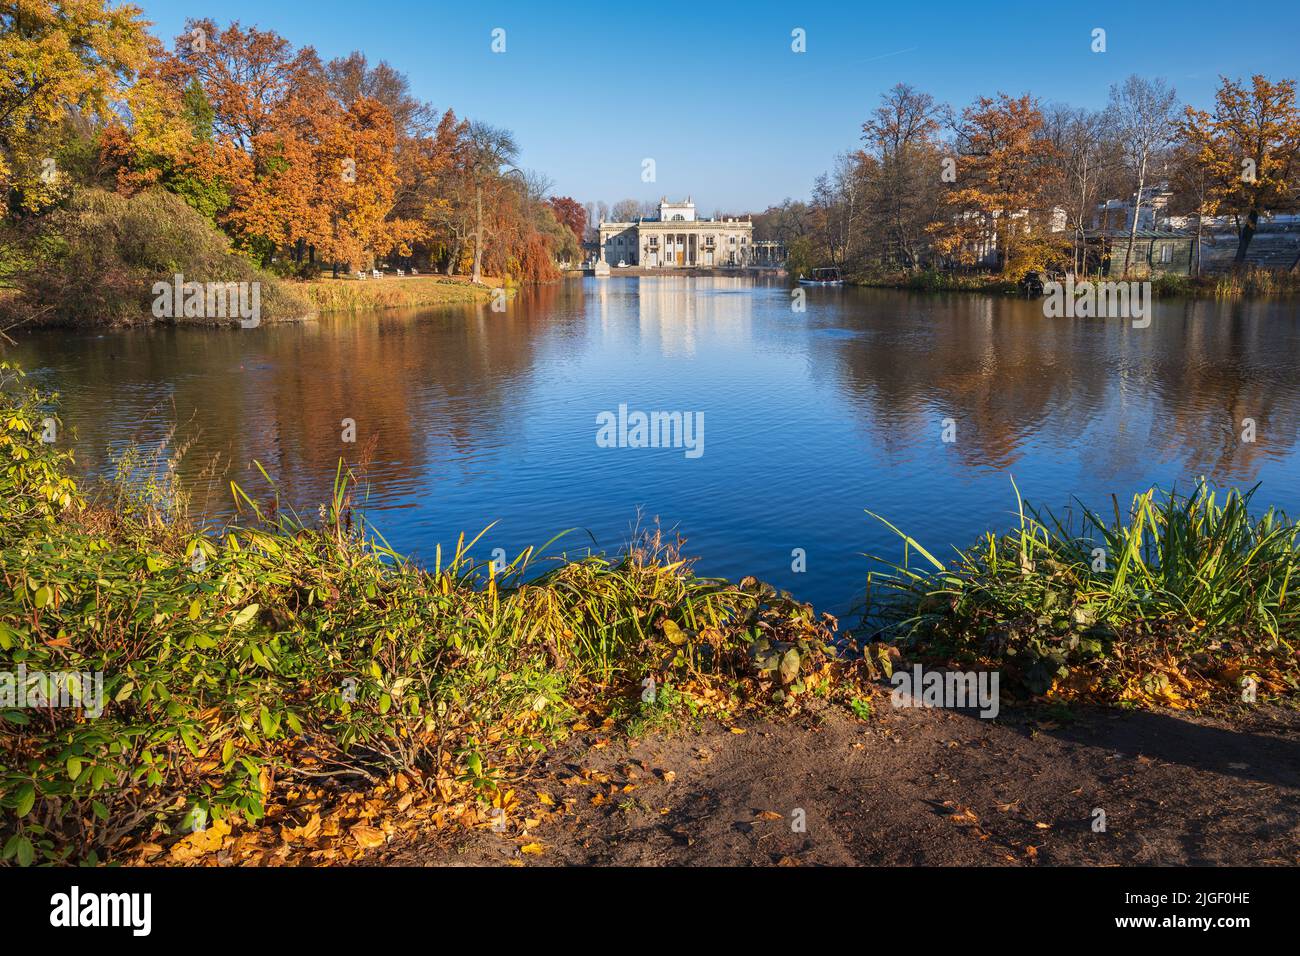 Royal Łazienki Park in city of Warsaw in Poland. Autumn landscape with lake and Palace on the Isle at the far end. Stock Photo